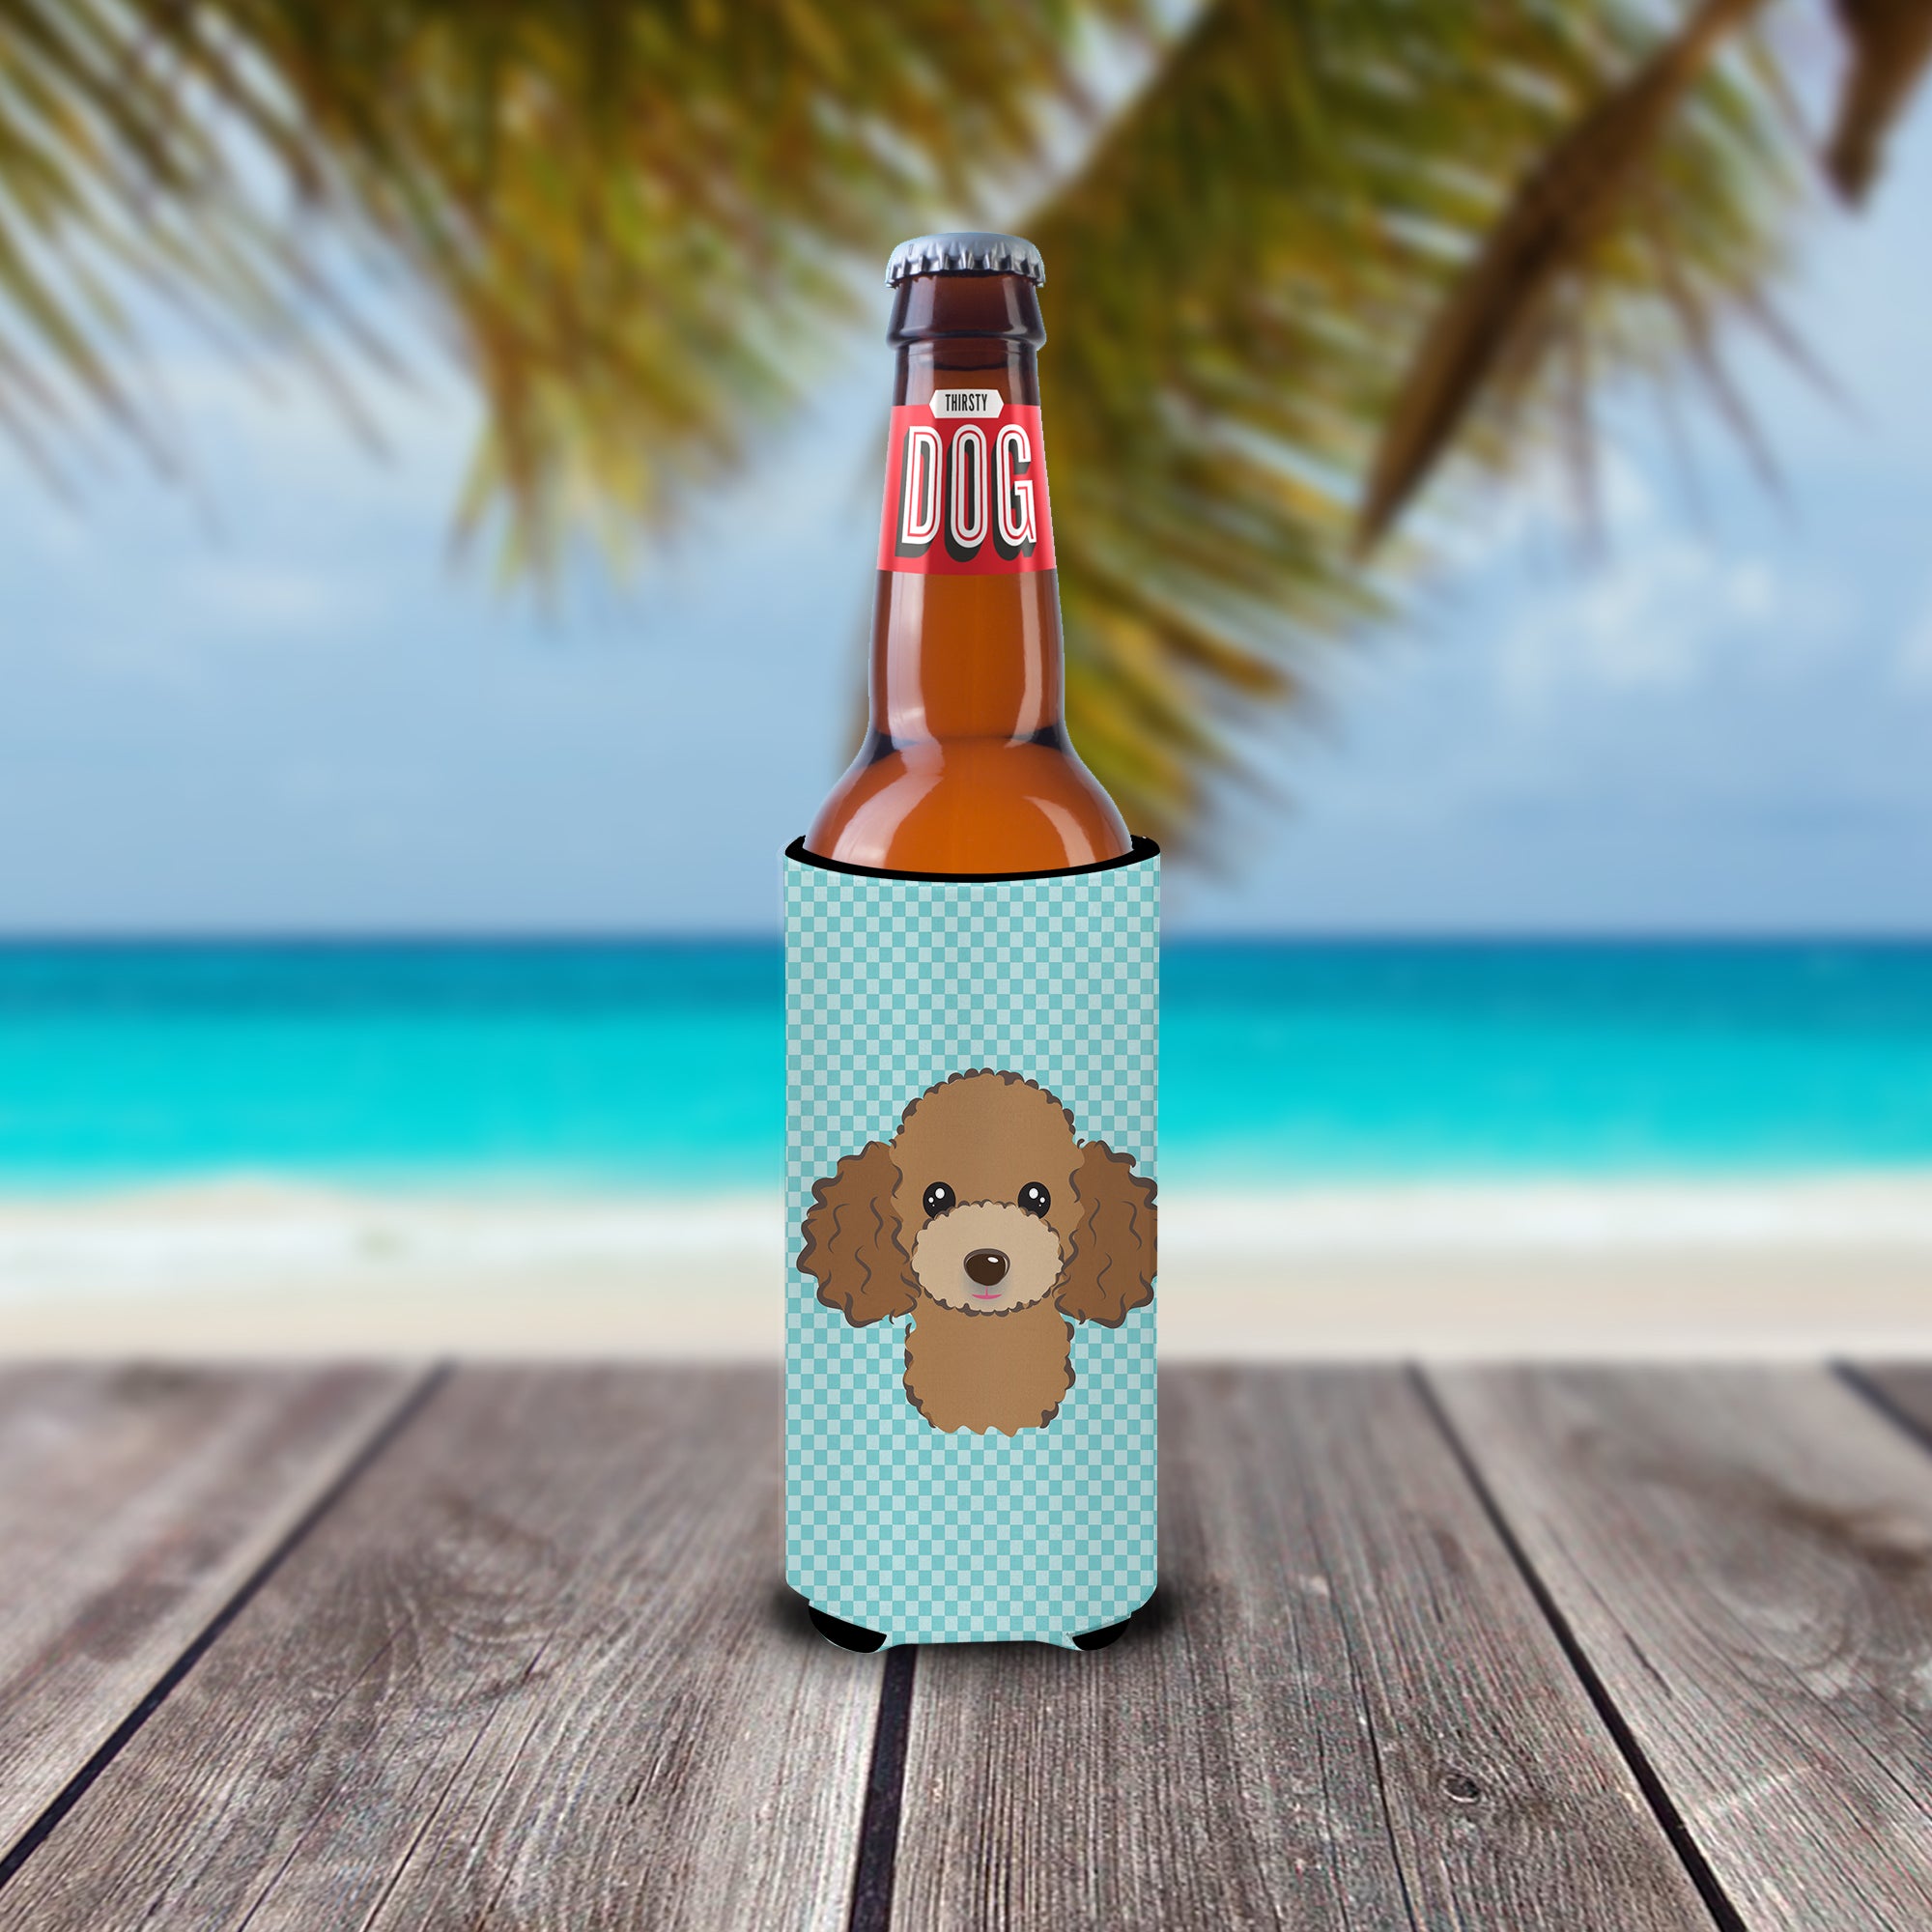 Checkerboard Blue Chocolate Brown Poodle Ultra Beverage Insulators for slim cans.